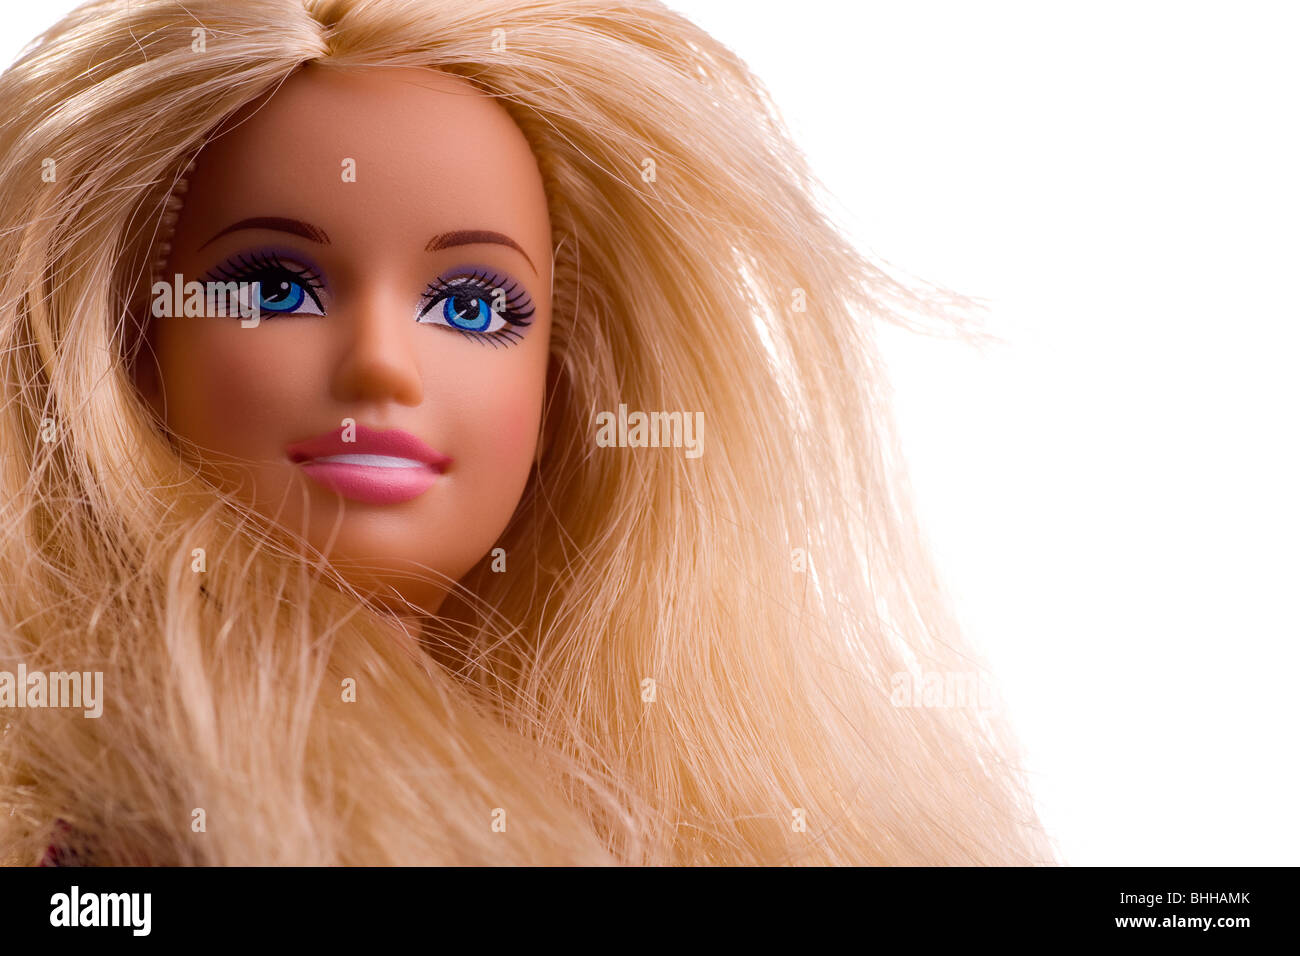 Close-up of a Barbie doll face with blonde hair & blue eyes Stock Photo